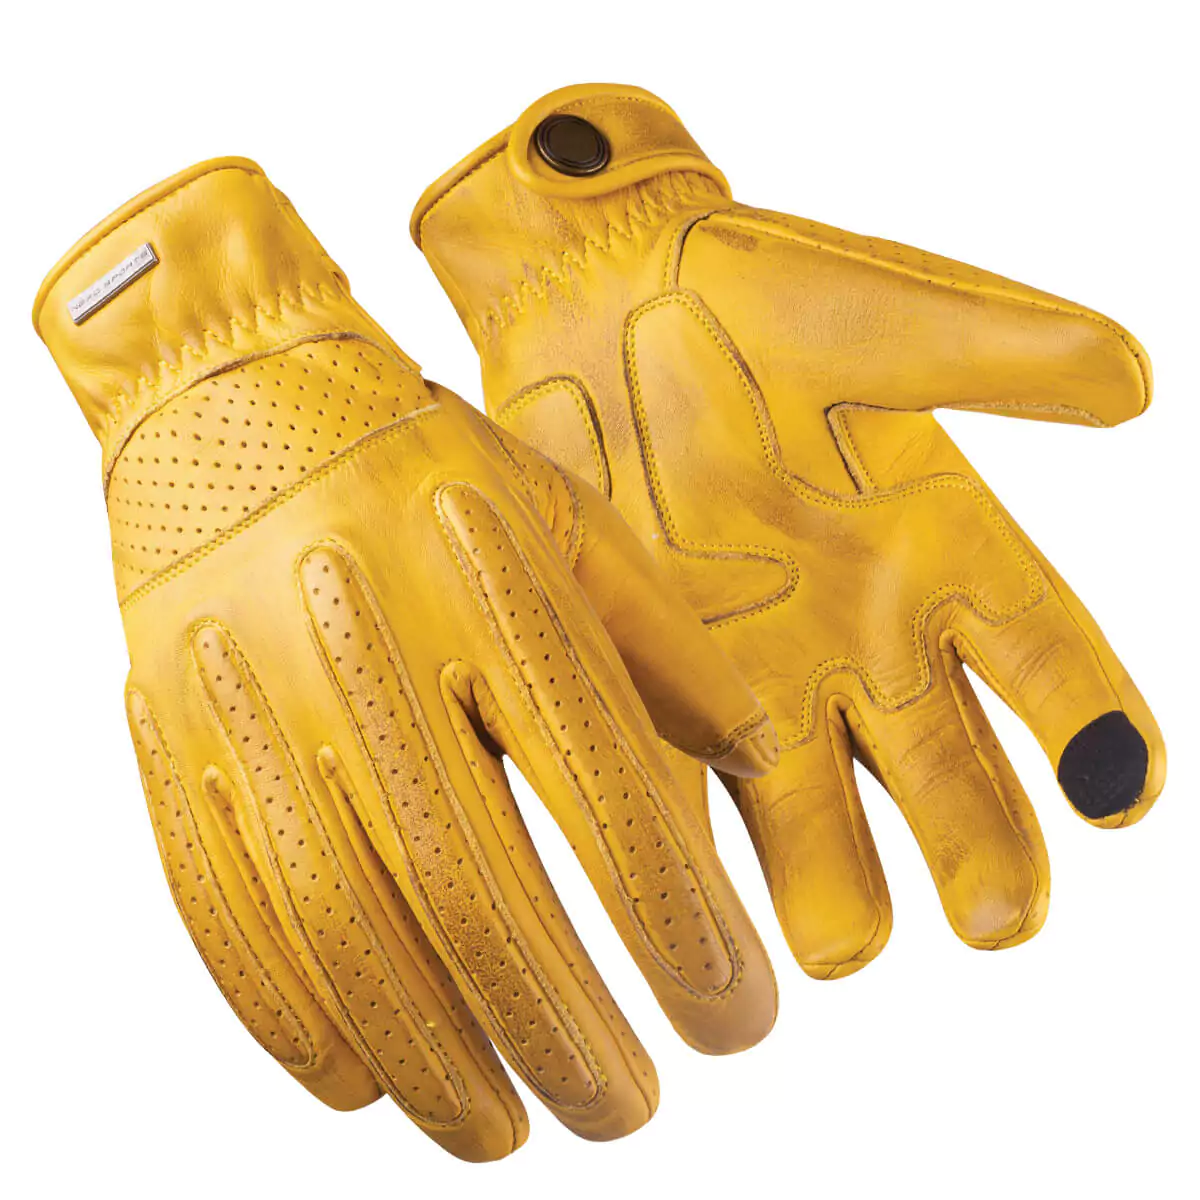 Motorbike summer gloves designed for warm weather riding with breathable materials.